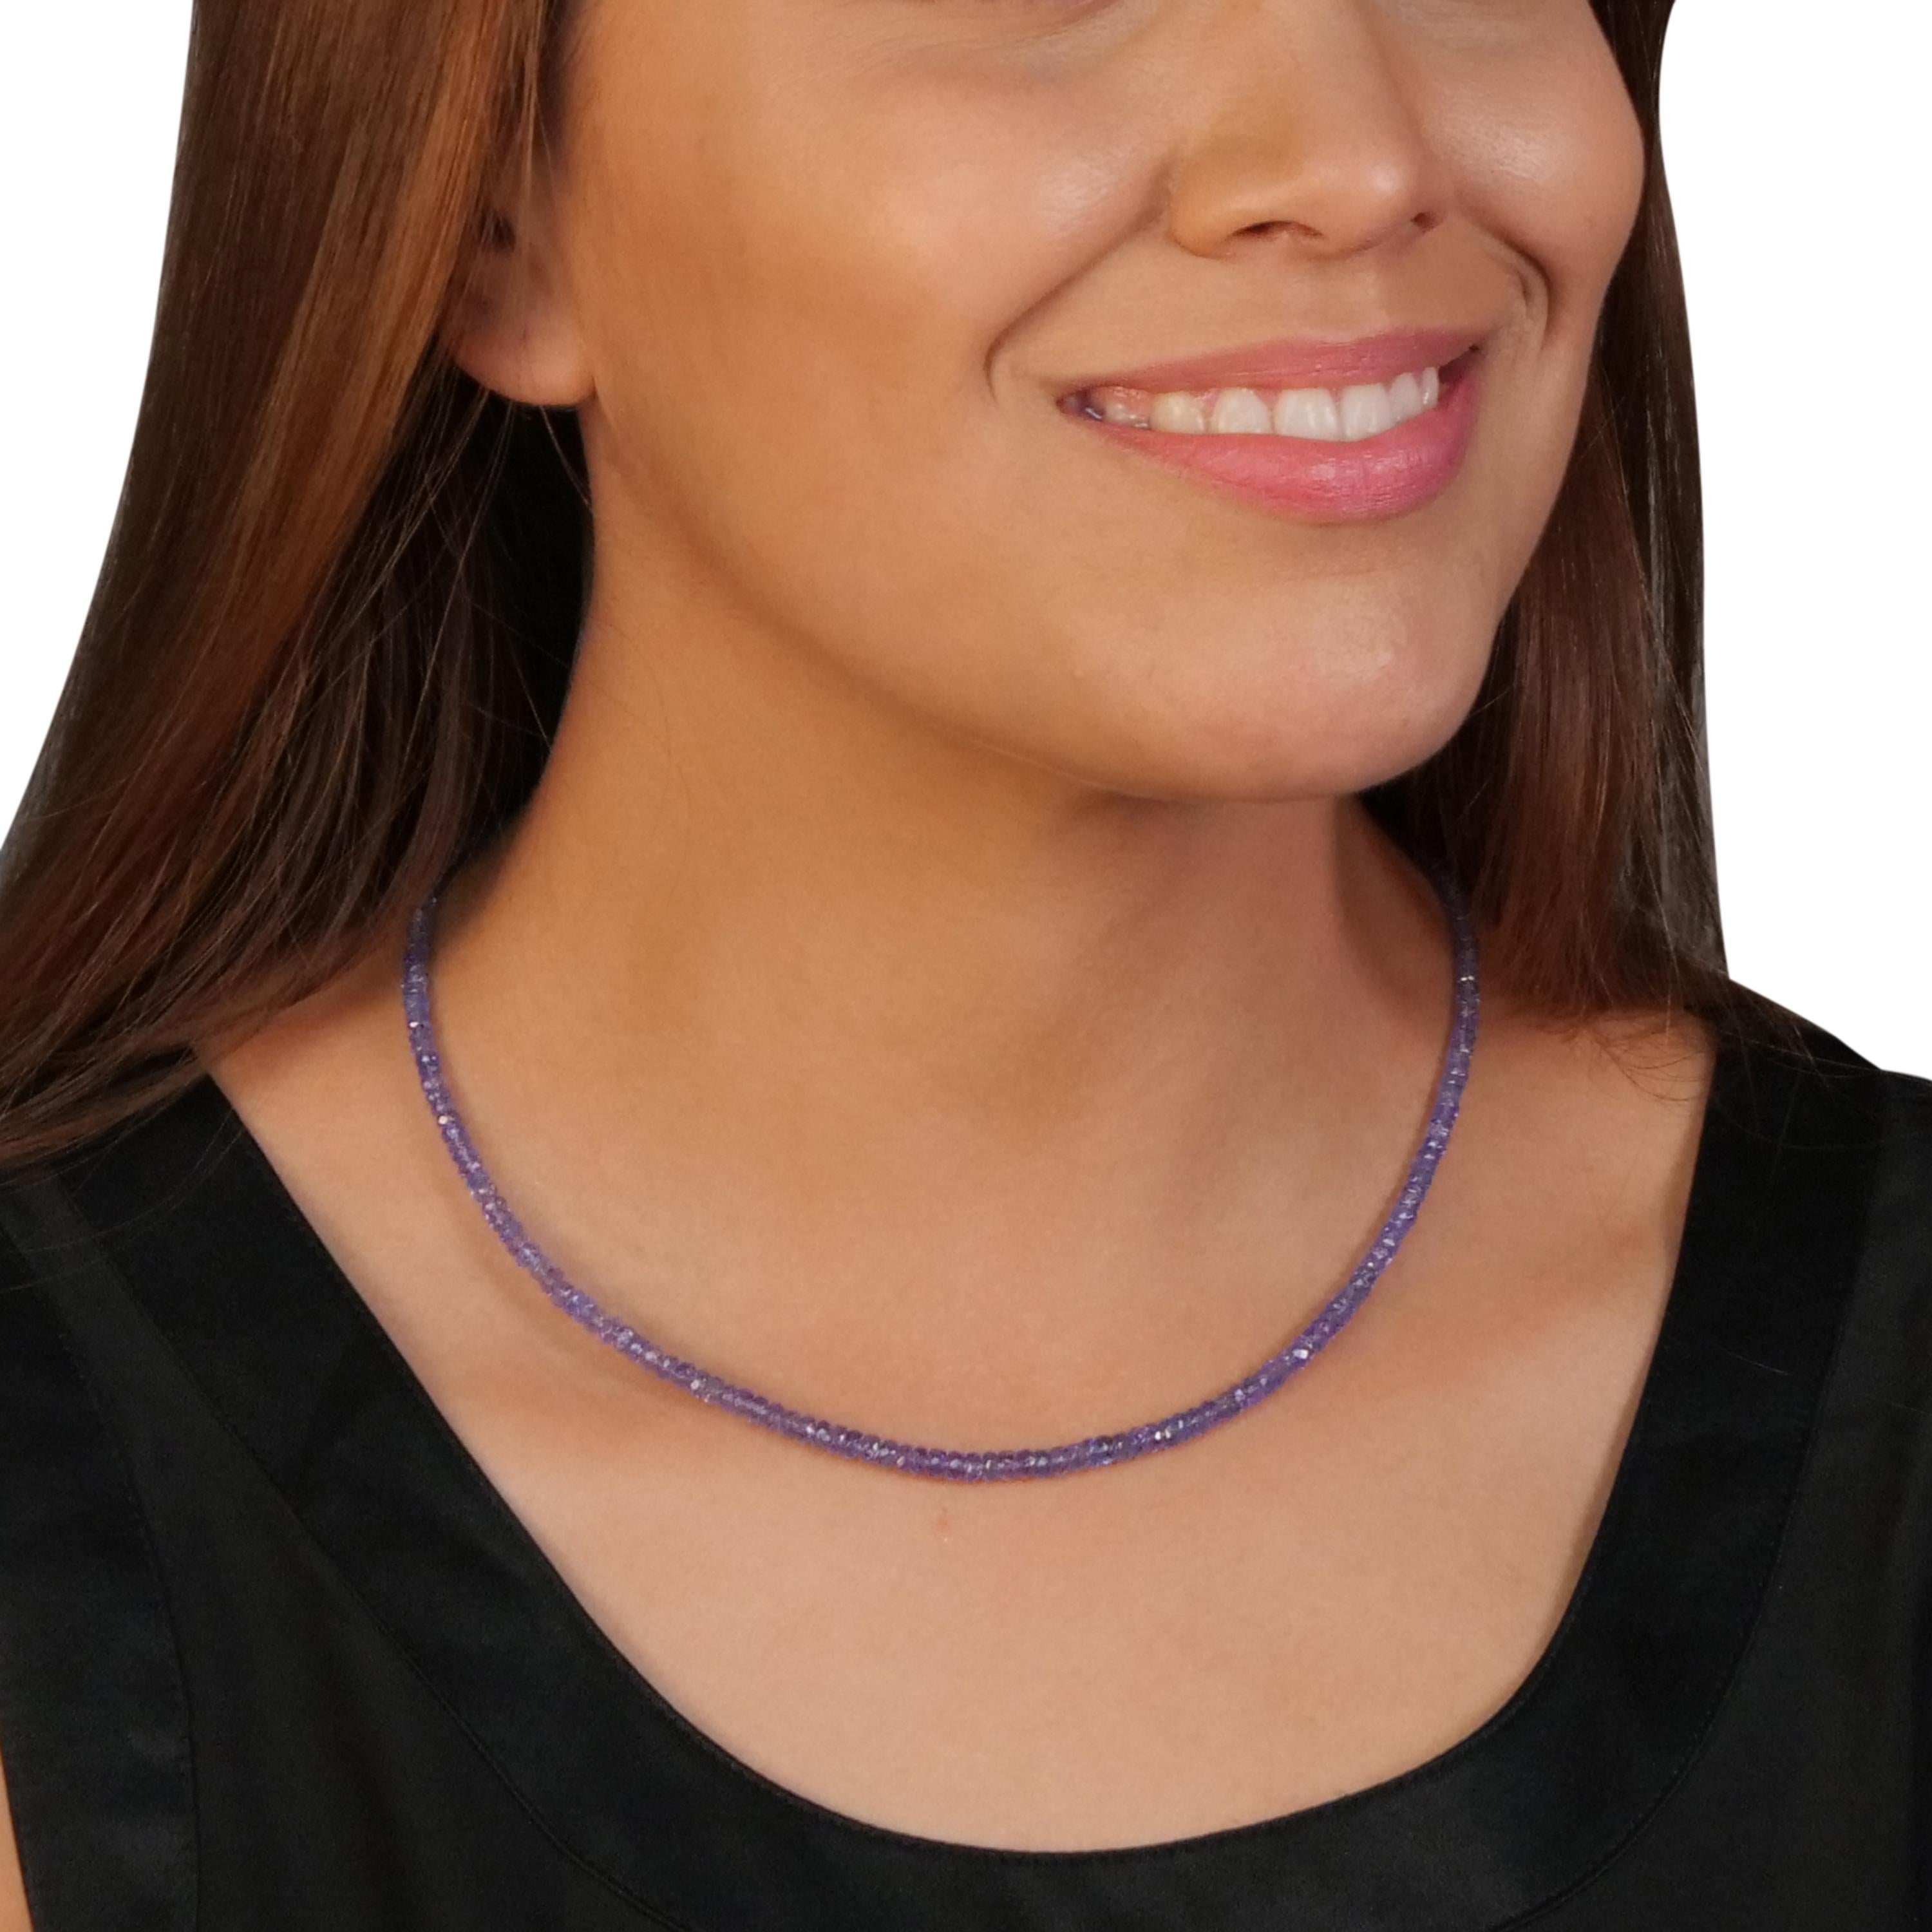 Women's Gemistry 56.57 Carat Tanzanite Beads Necklace in 925 Sterling Silver For Sale